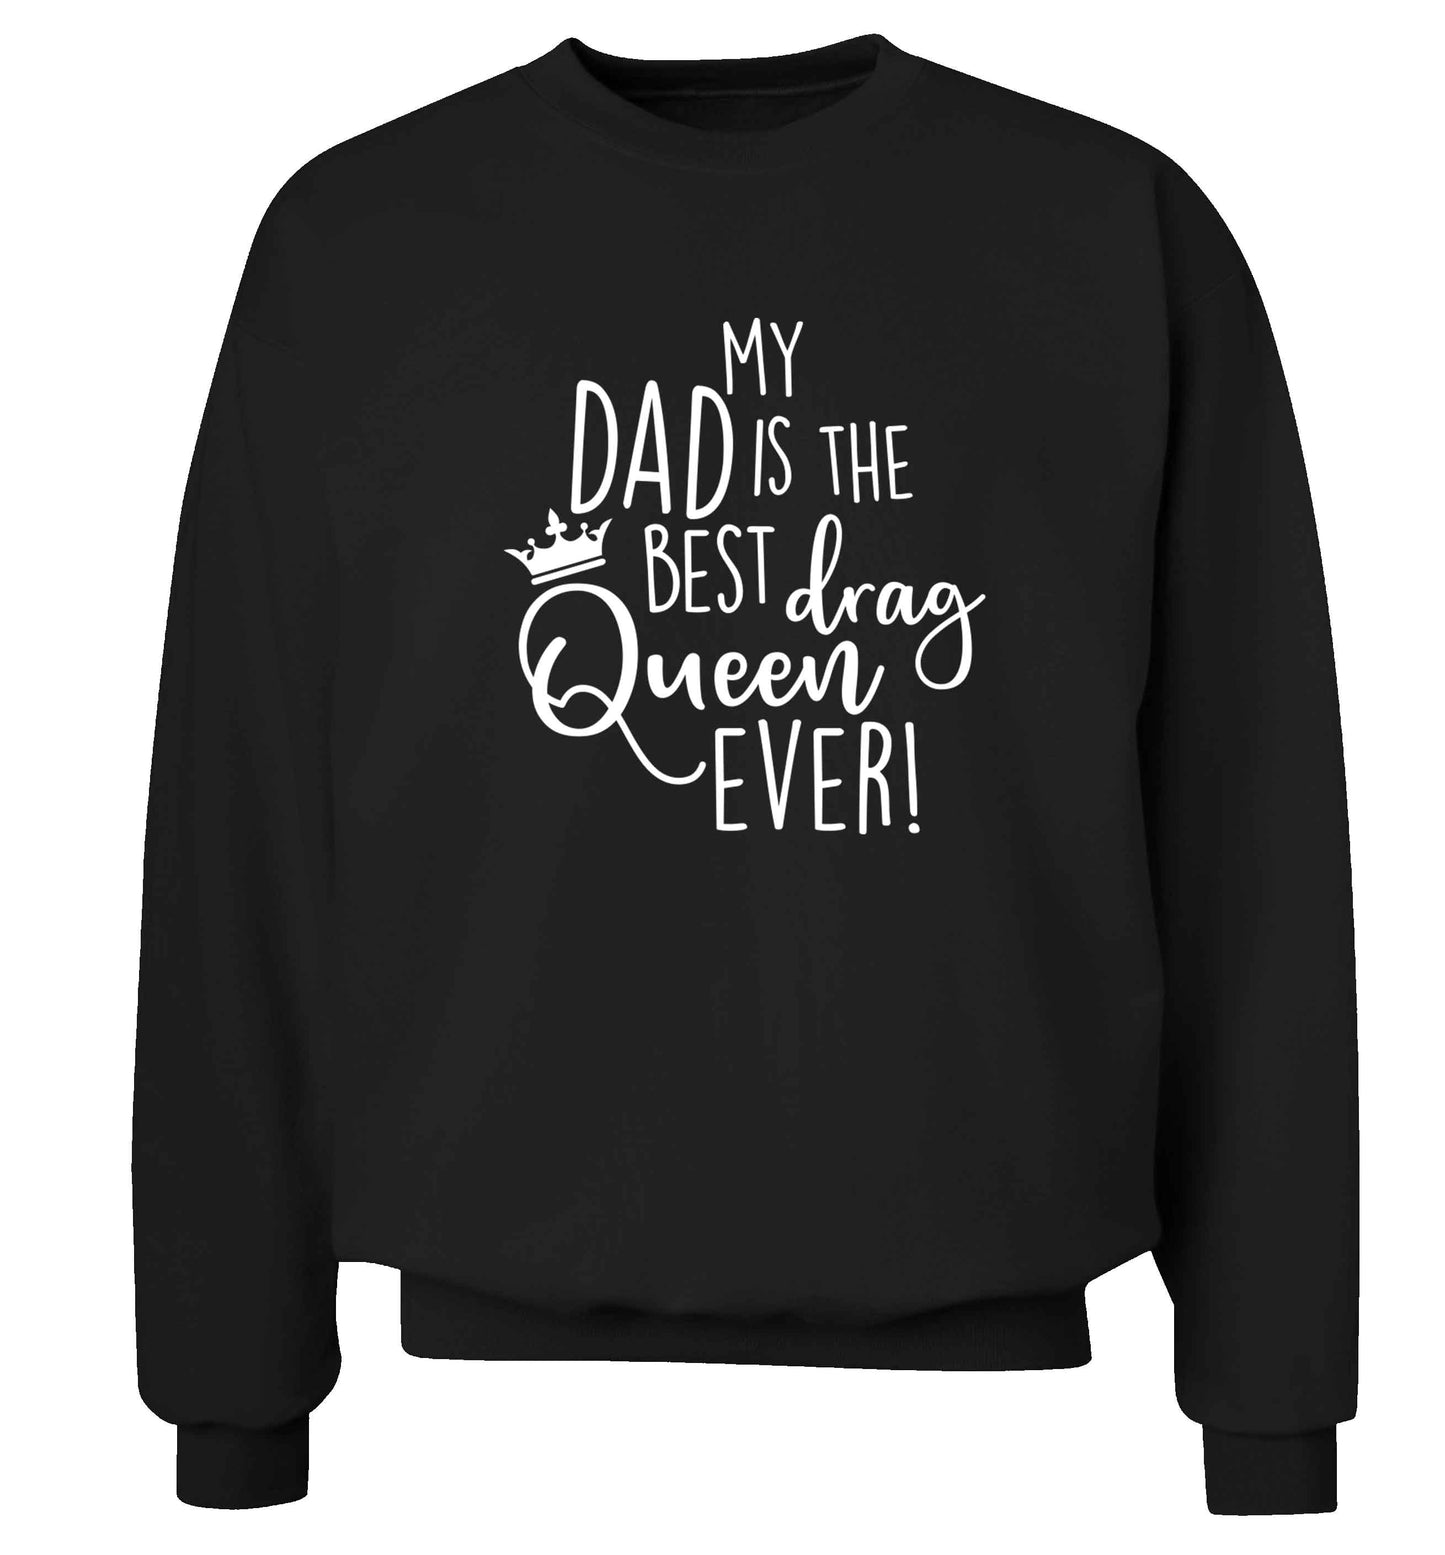 My dad is the best drag Queen ever Adult's unisex black Sweater 2XL